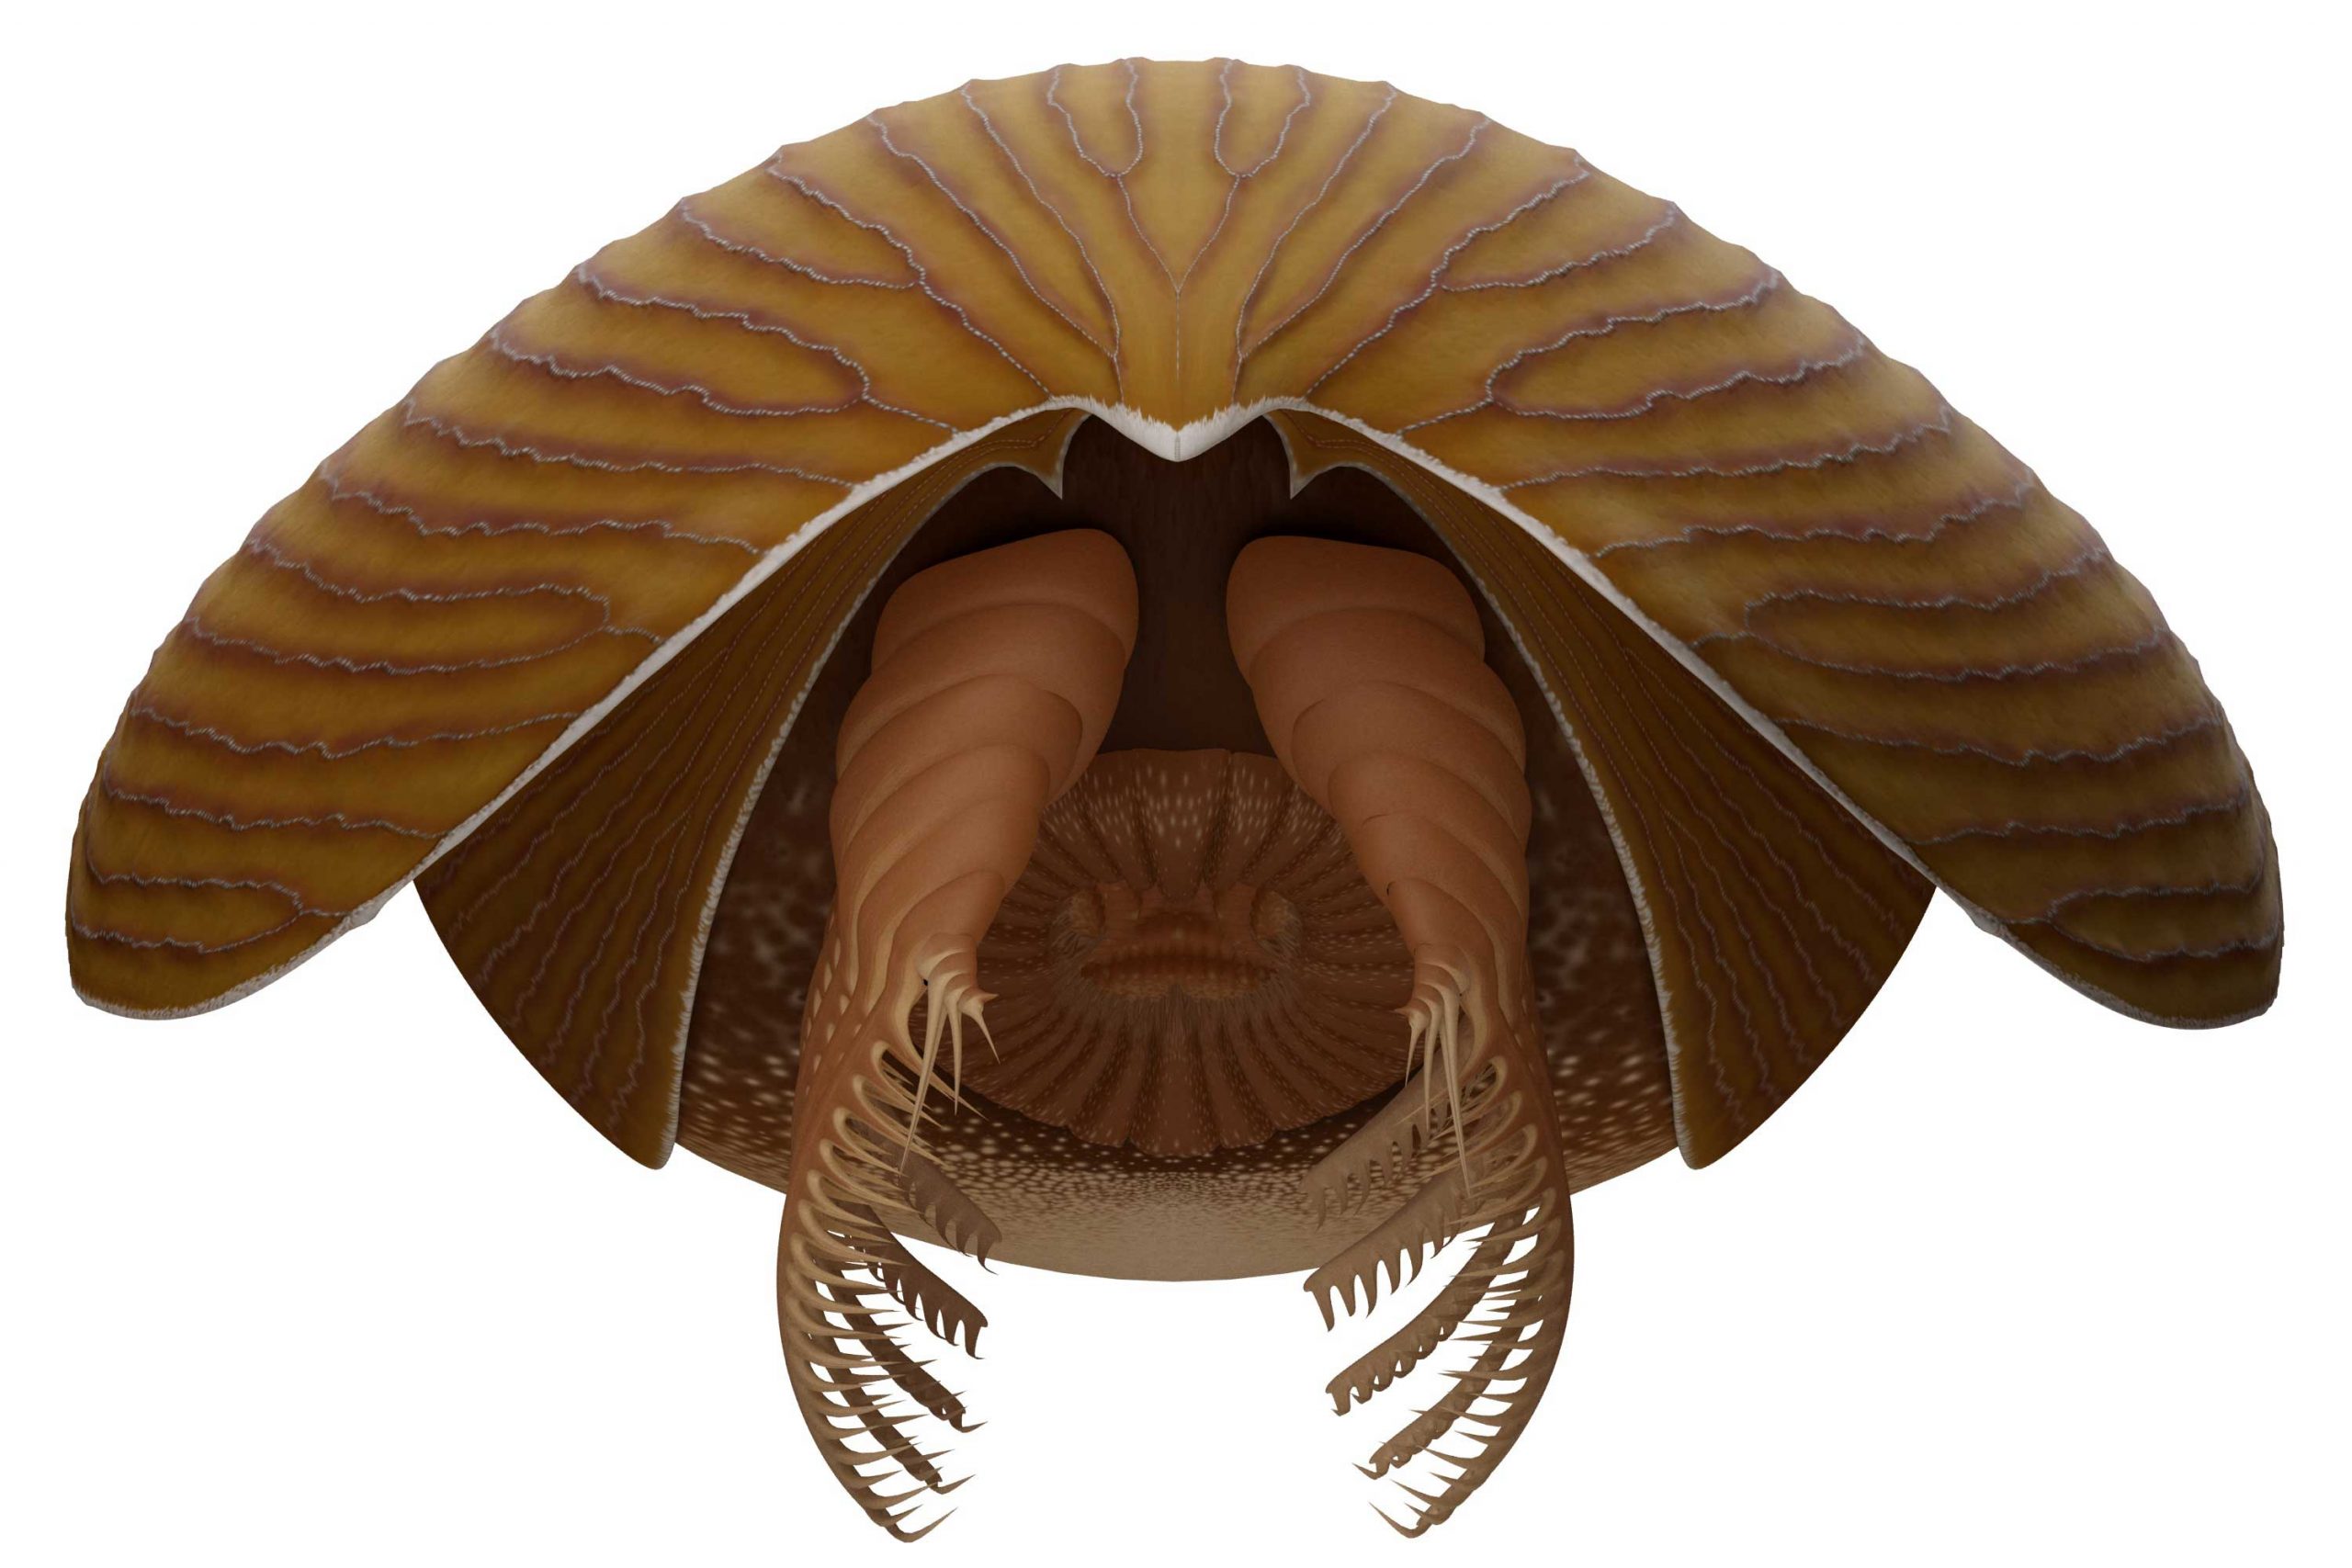 Absolutely Mind-Boggling” Massive New Animal Species Discovered in 500  Million-Year-Old Burgess Shale